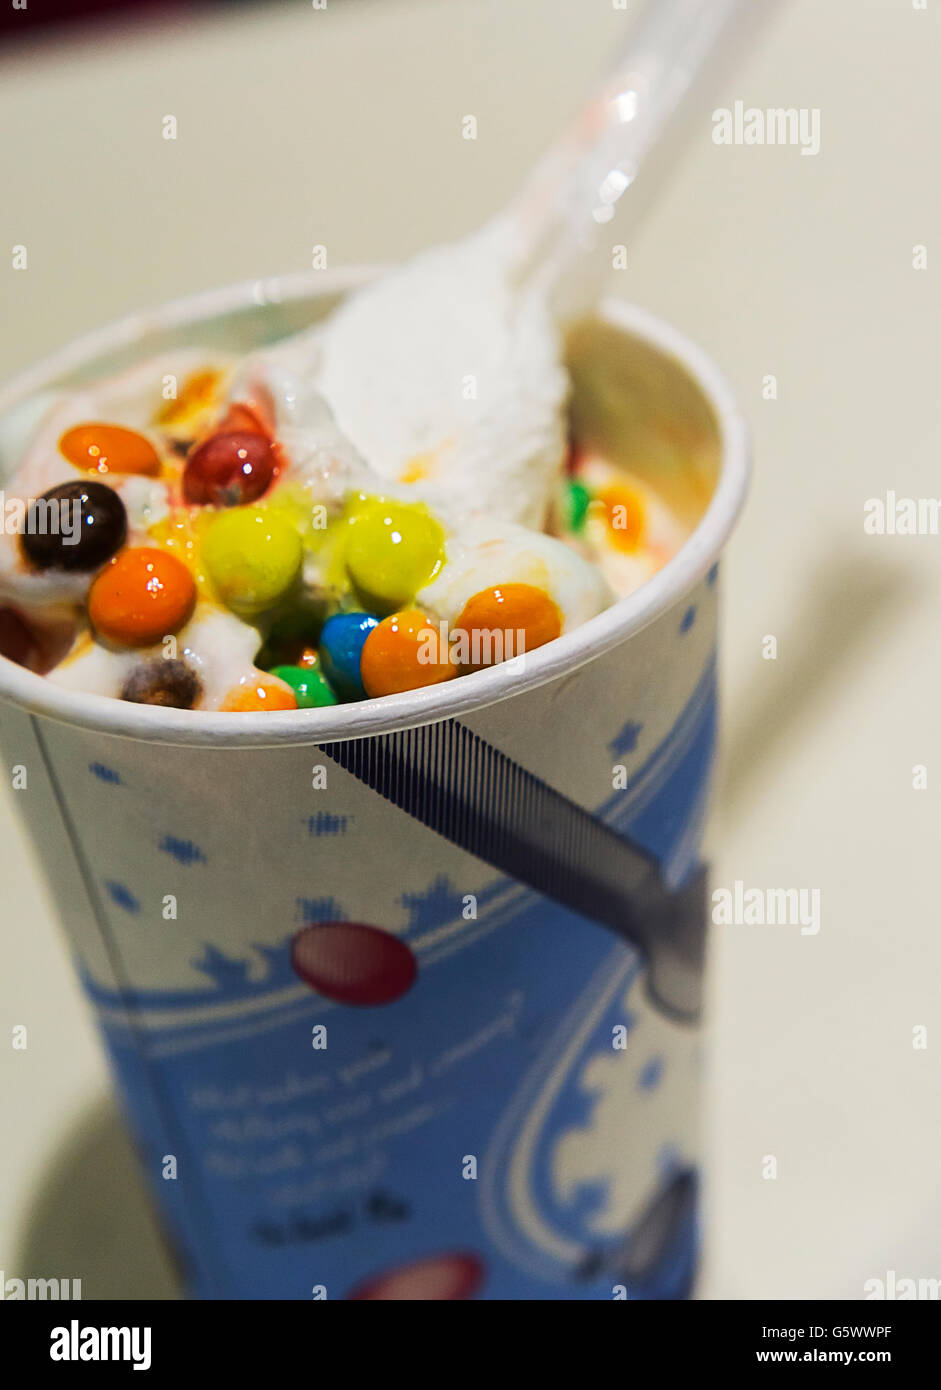 A mouth watering M&M McFlurry in a McDonald's restaurant in New York on Friday, June 17, 2016. Mars, the company behind the iconic M&M candies, is concerned about consumers eating too much sugar and is considering pulling their M&M's from fast food products such as the McFlurry, and Dairy Queen's Blizzard concoctions. Privately owned Mars Inc. is the world's largest confectioner and also makes Snickers, Mars Bars, Twix and other candies. (© Richard B. Levine) Stock Photo